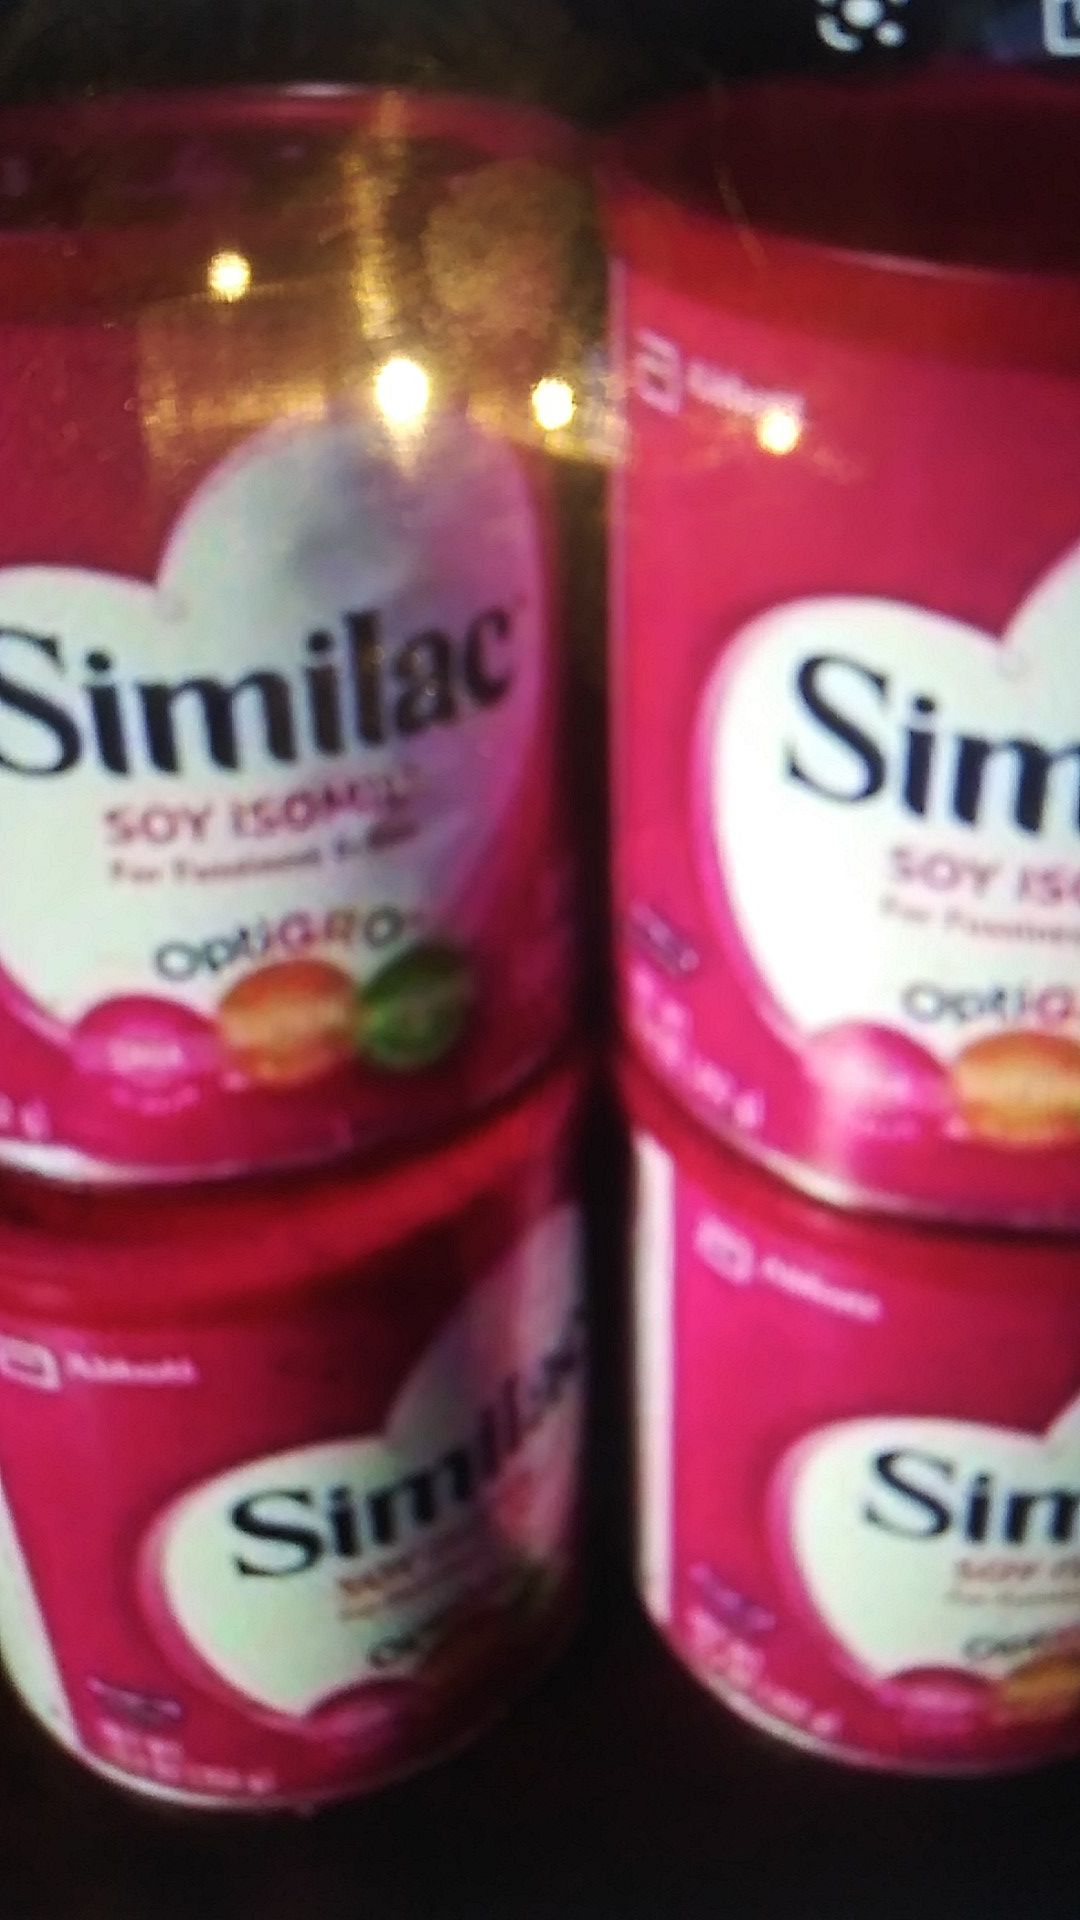 Similac soy isomil